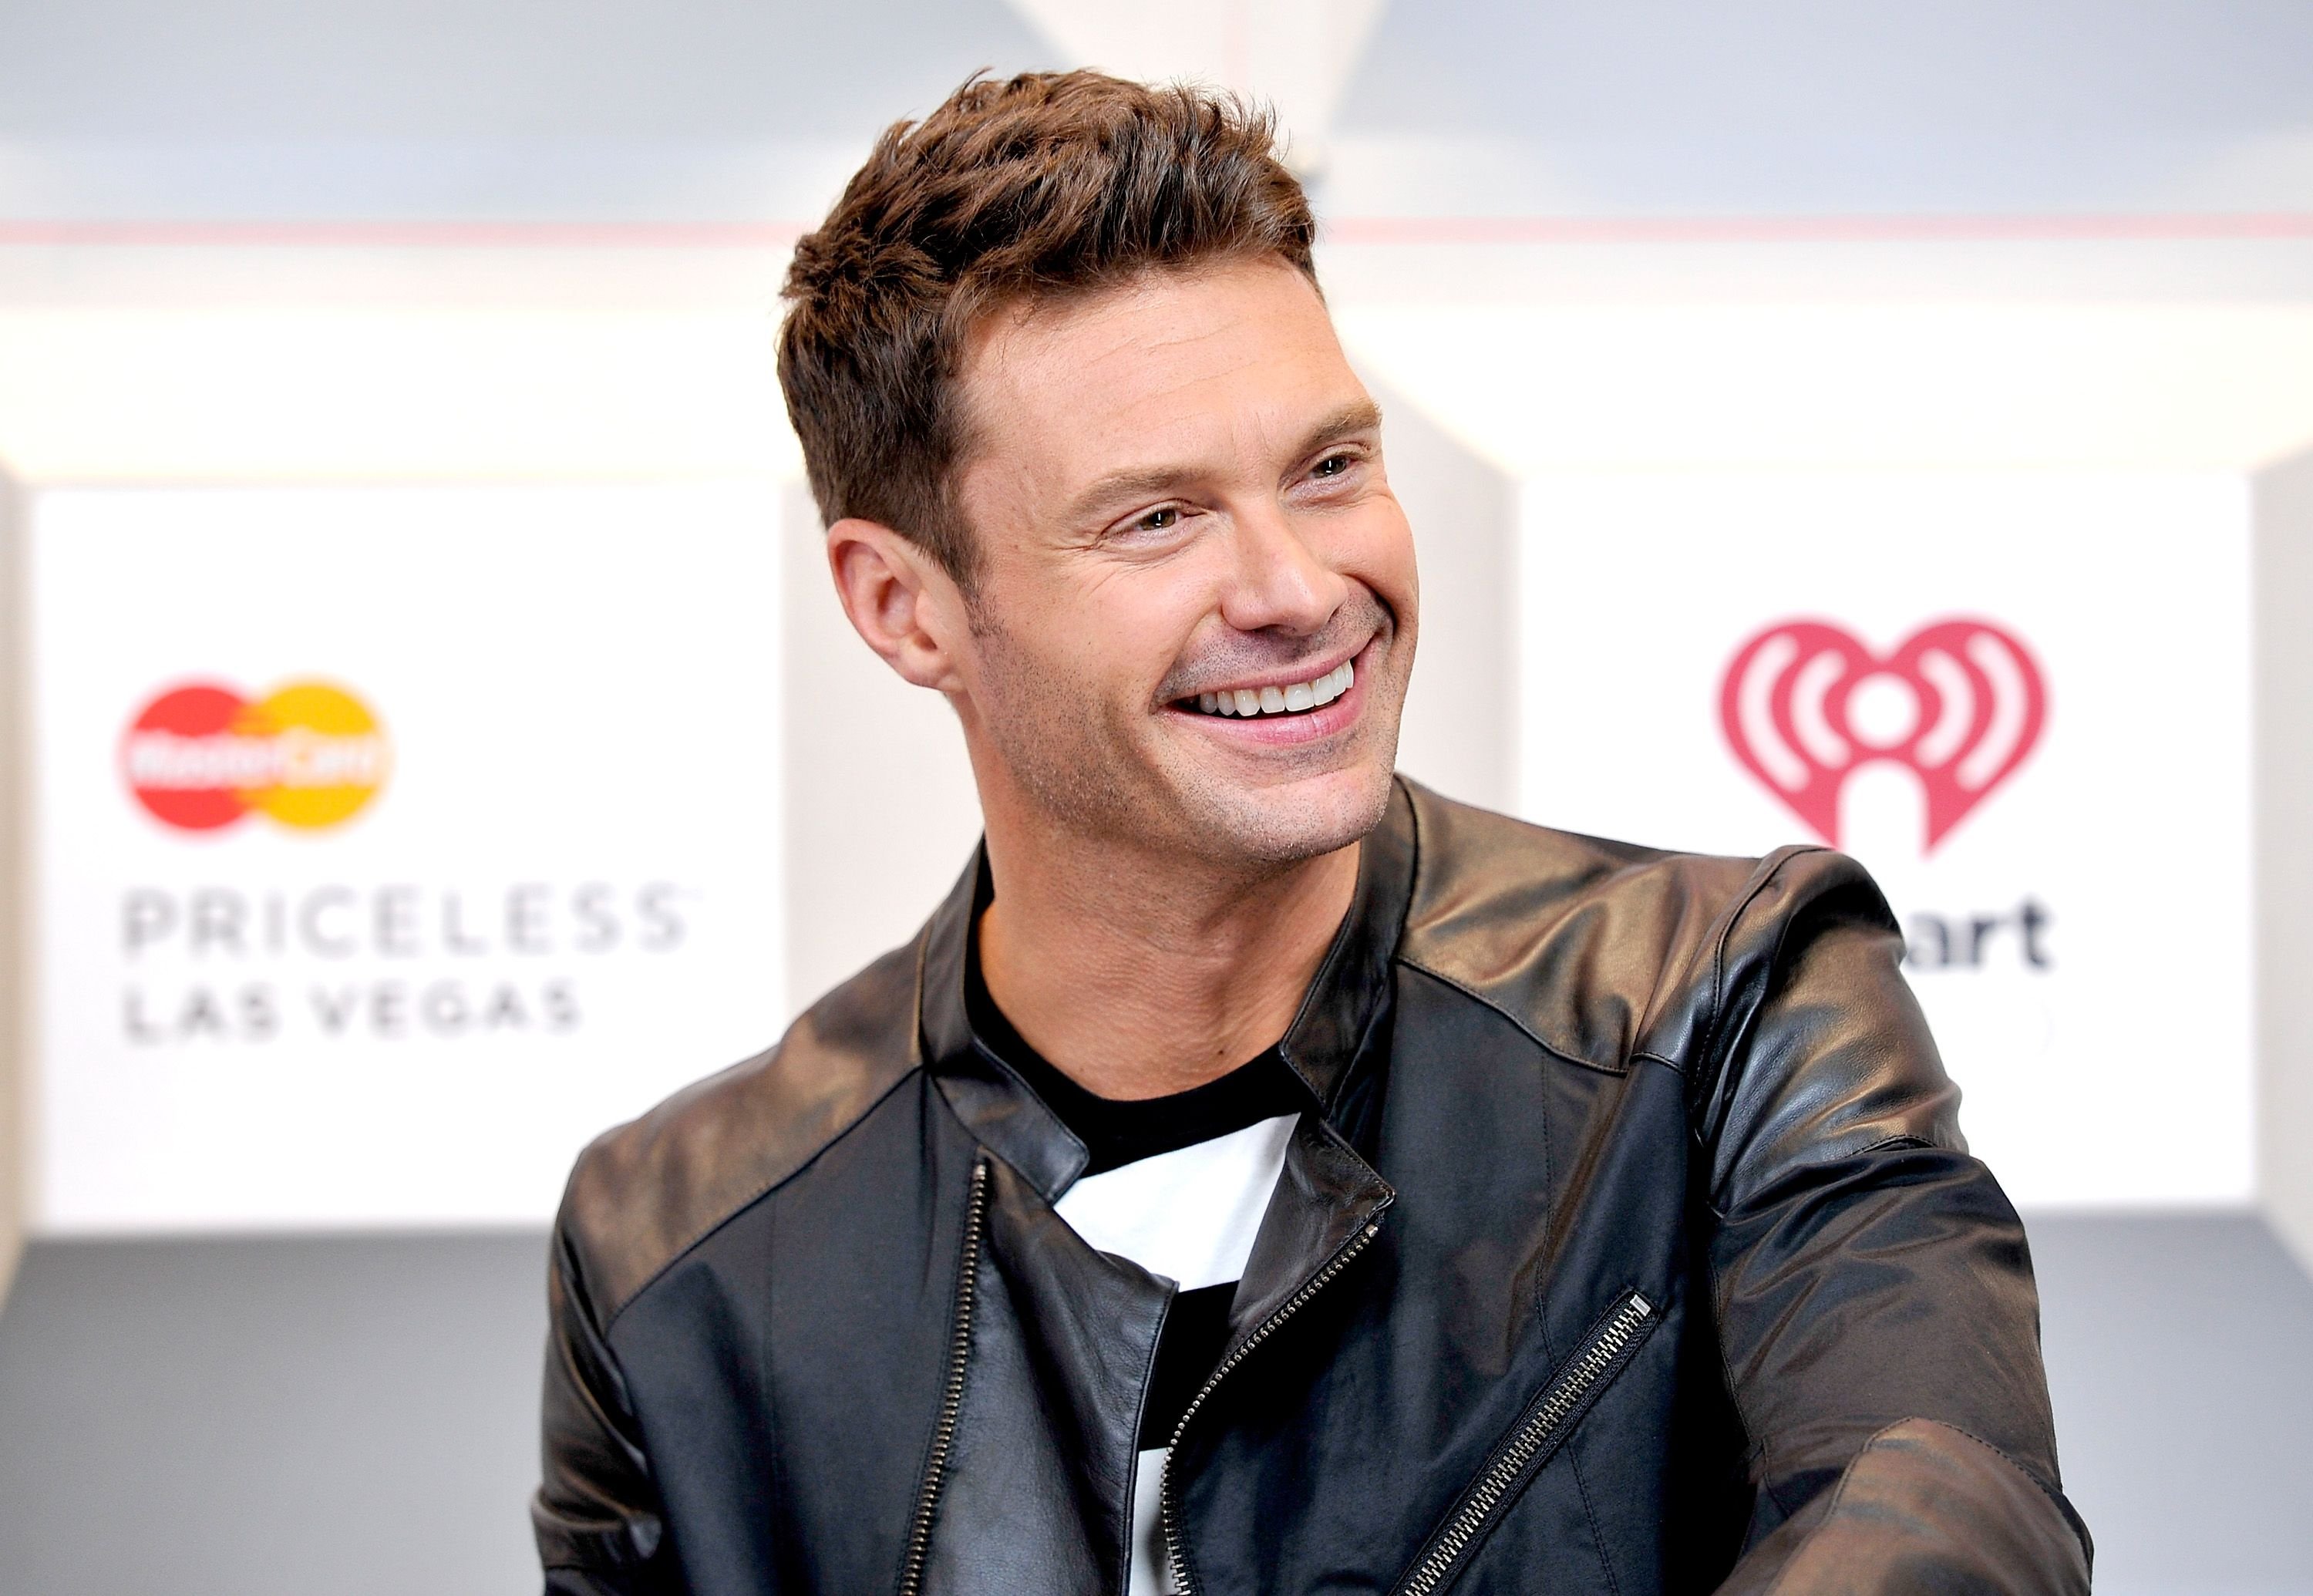 Ryan Seacrest at the iHeartRadio Music Festival on September 19, 2014, in Las Vegas, Nevada | Photo: David Becker/Getty Images